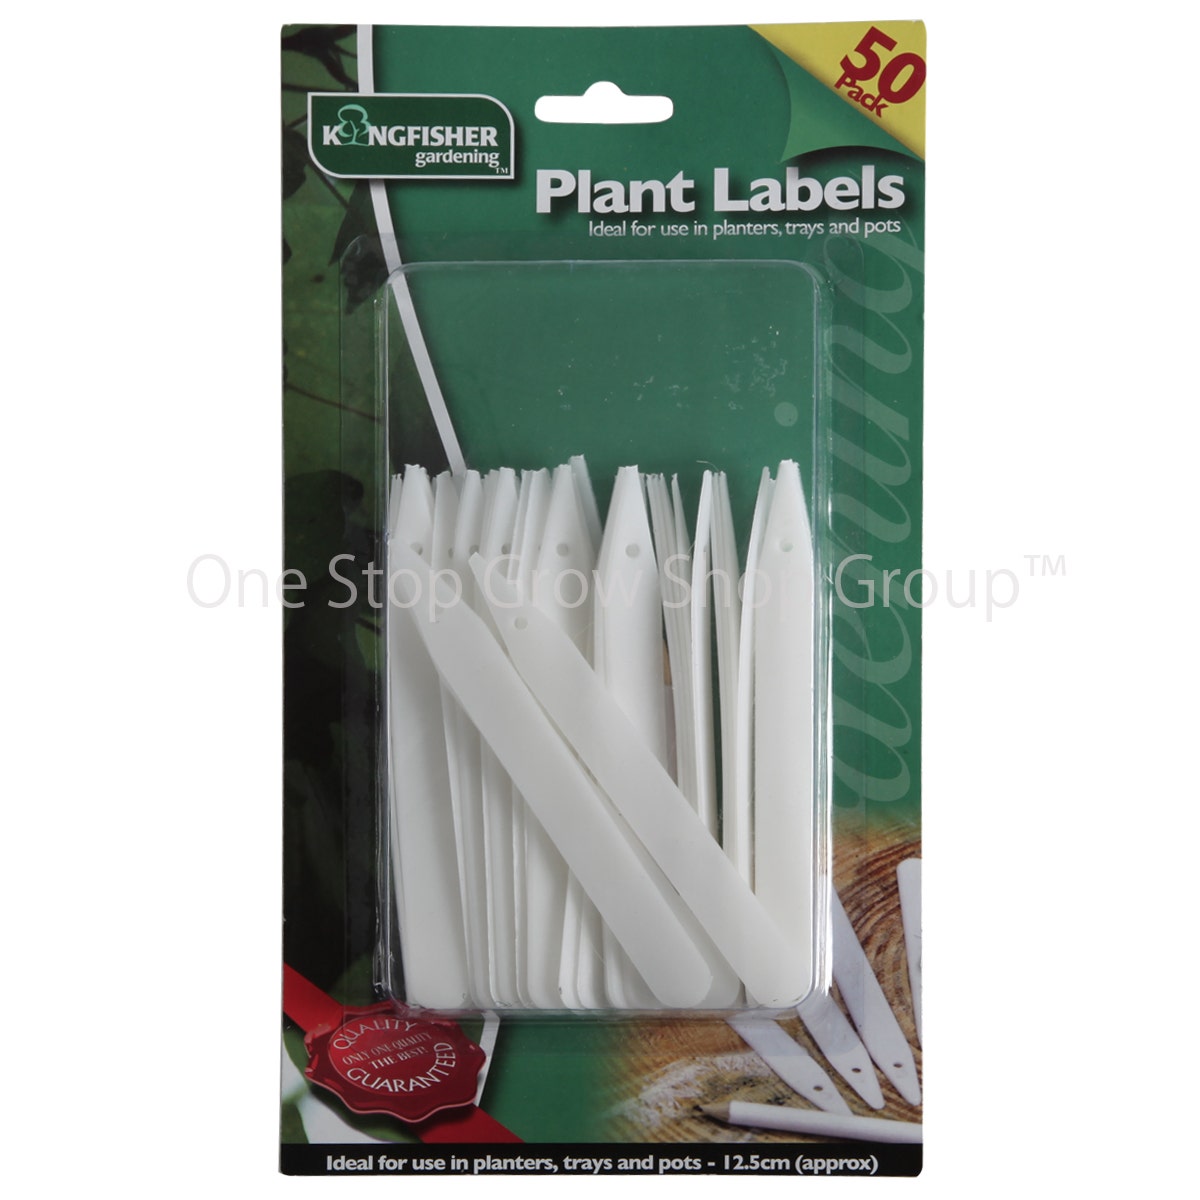 Kingfisher Plant Labels - 50 Pack